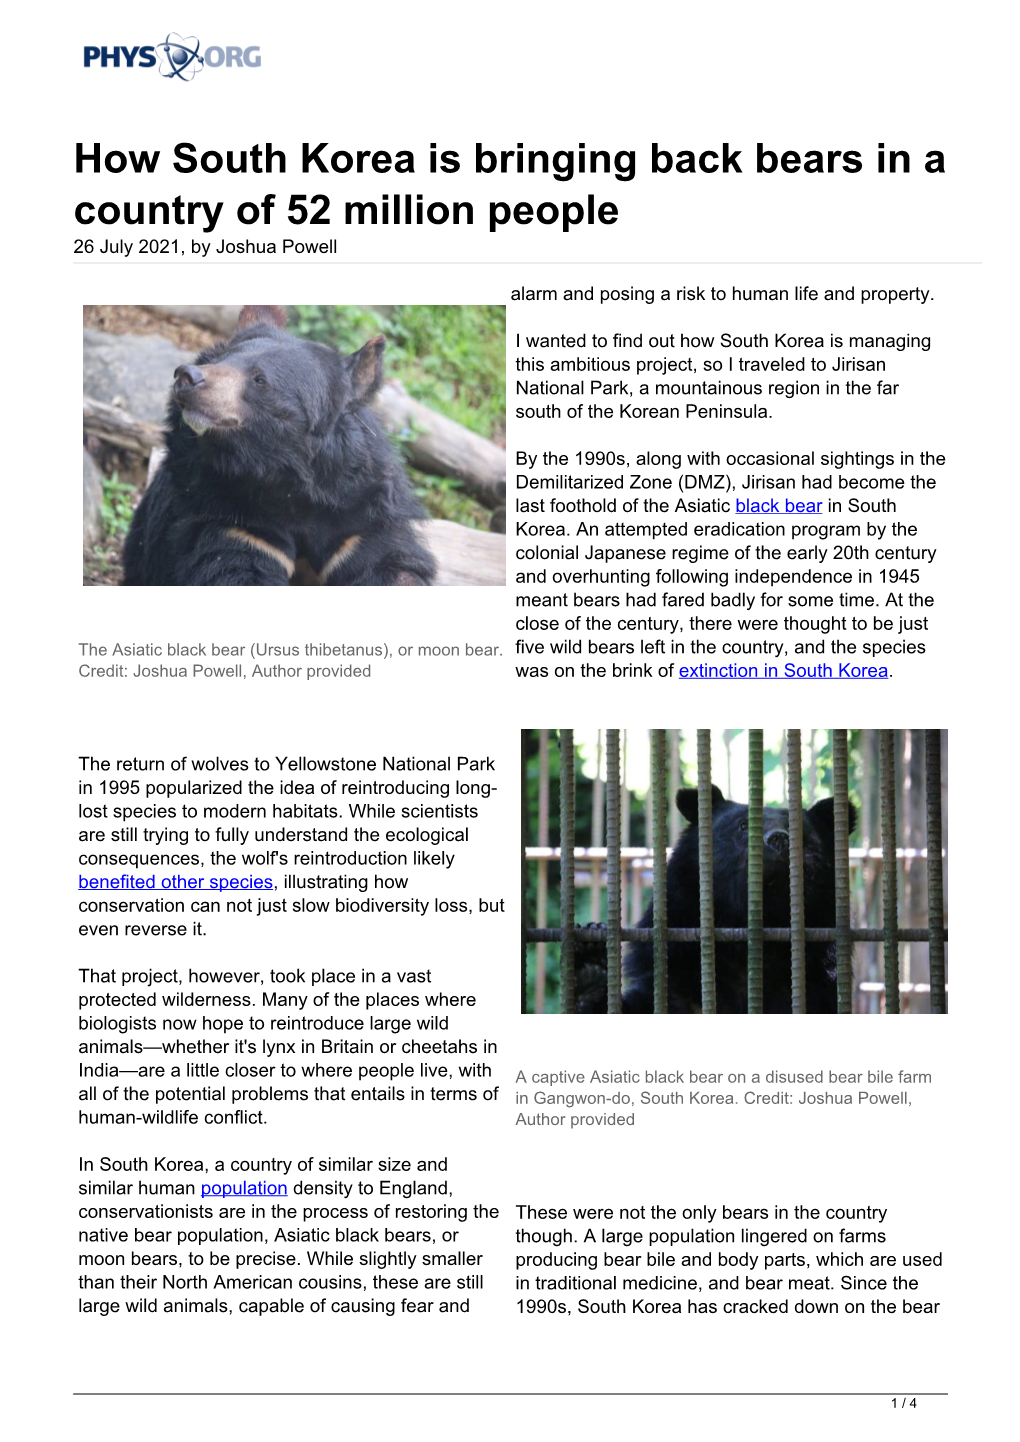 How South Korea Is Bringing Back Bears in a Country of 52 Million People 26 July 2021, by Joshua Powell